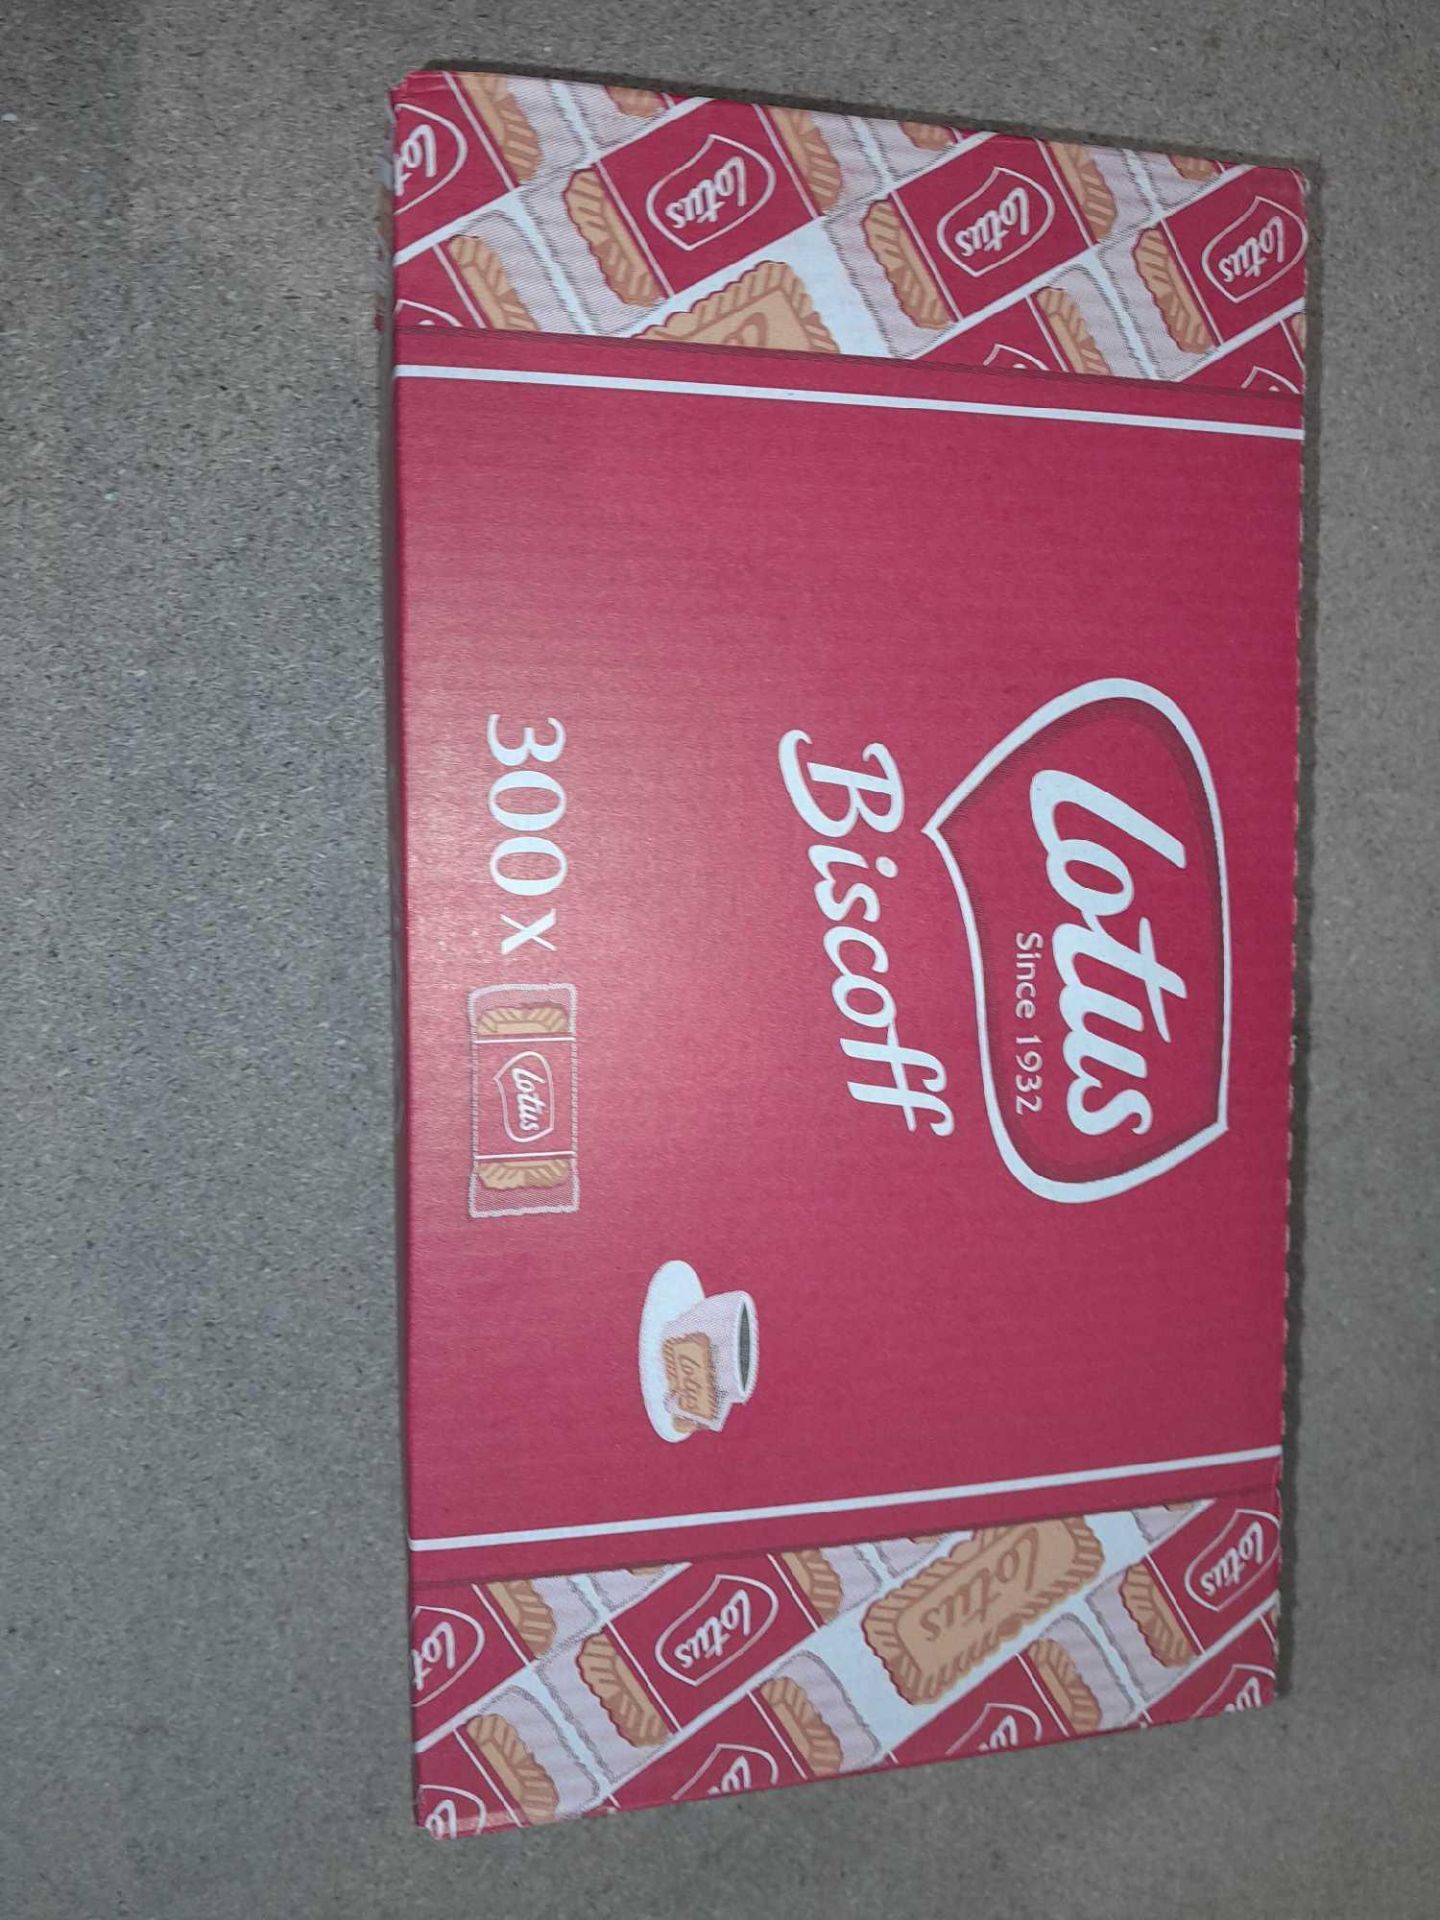 RRP £210 Brand New X15 Boxes Of Lotus Biscoff Caramelised Biscuit X300 Per Box 1.875Kg, Best Before - Image 2 of 2